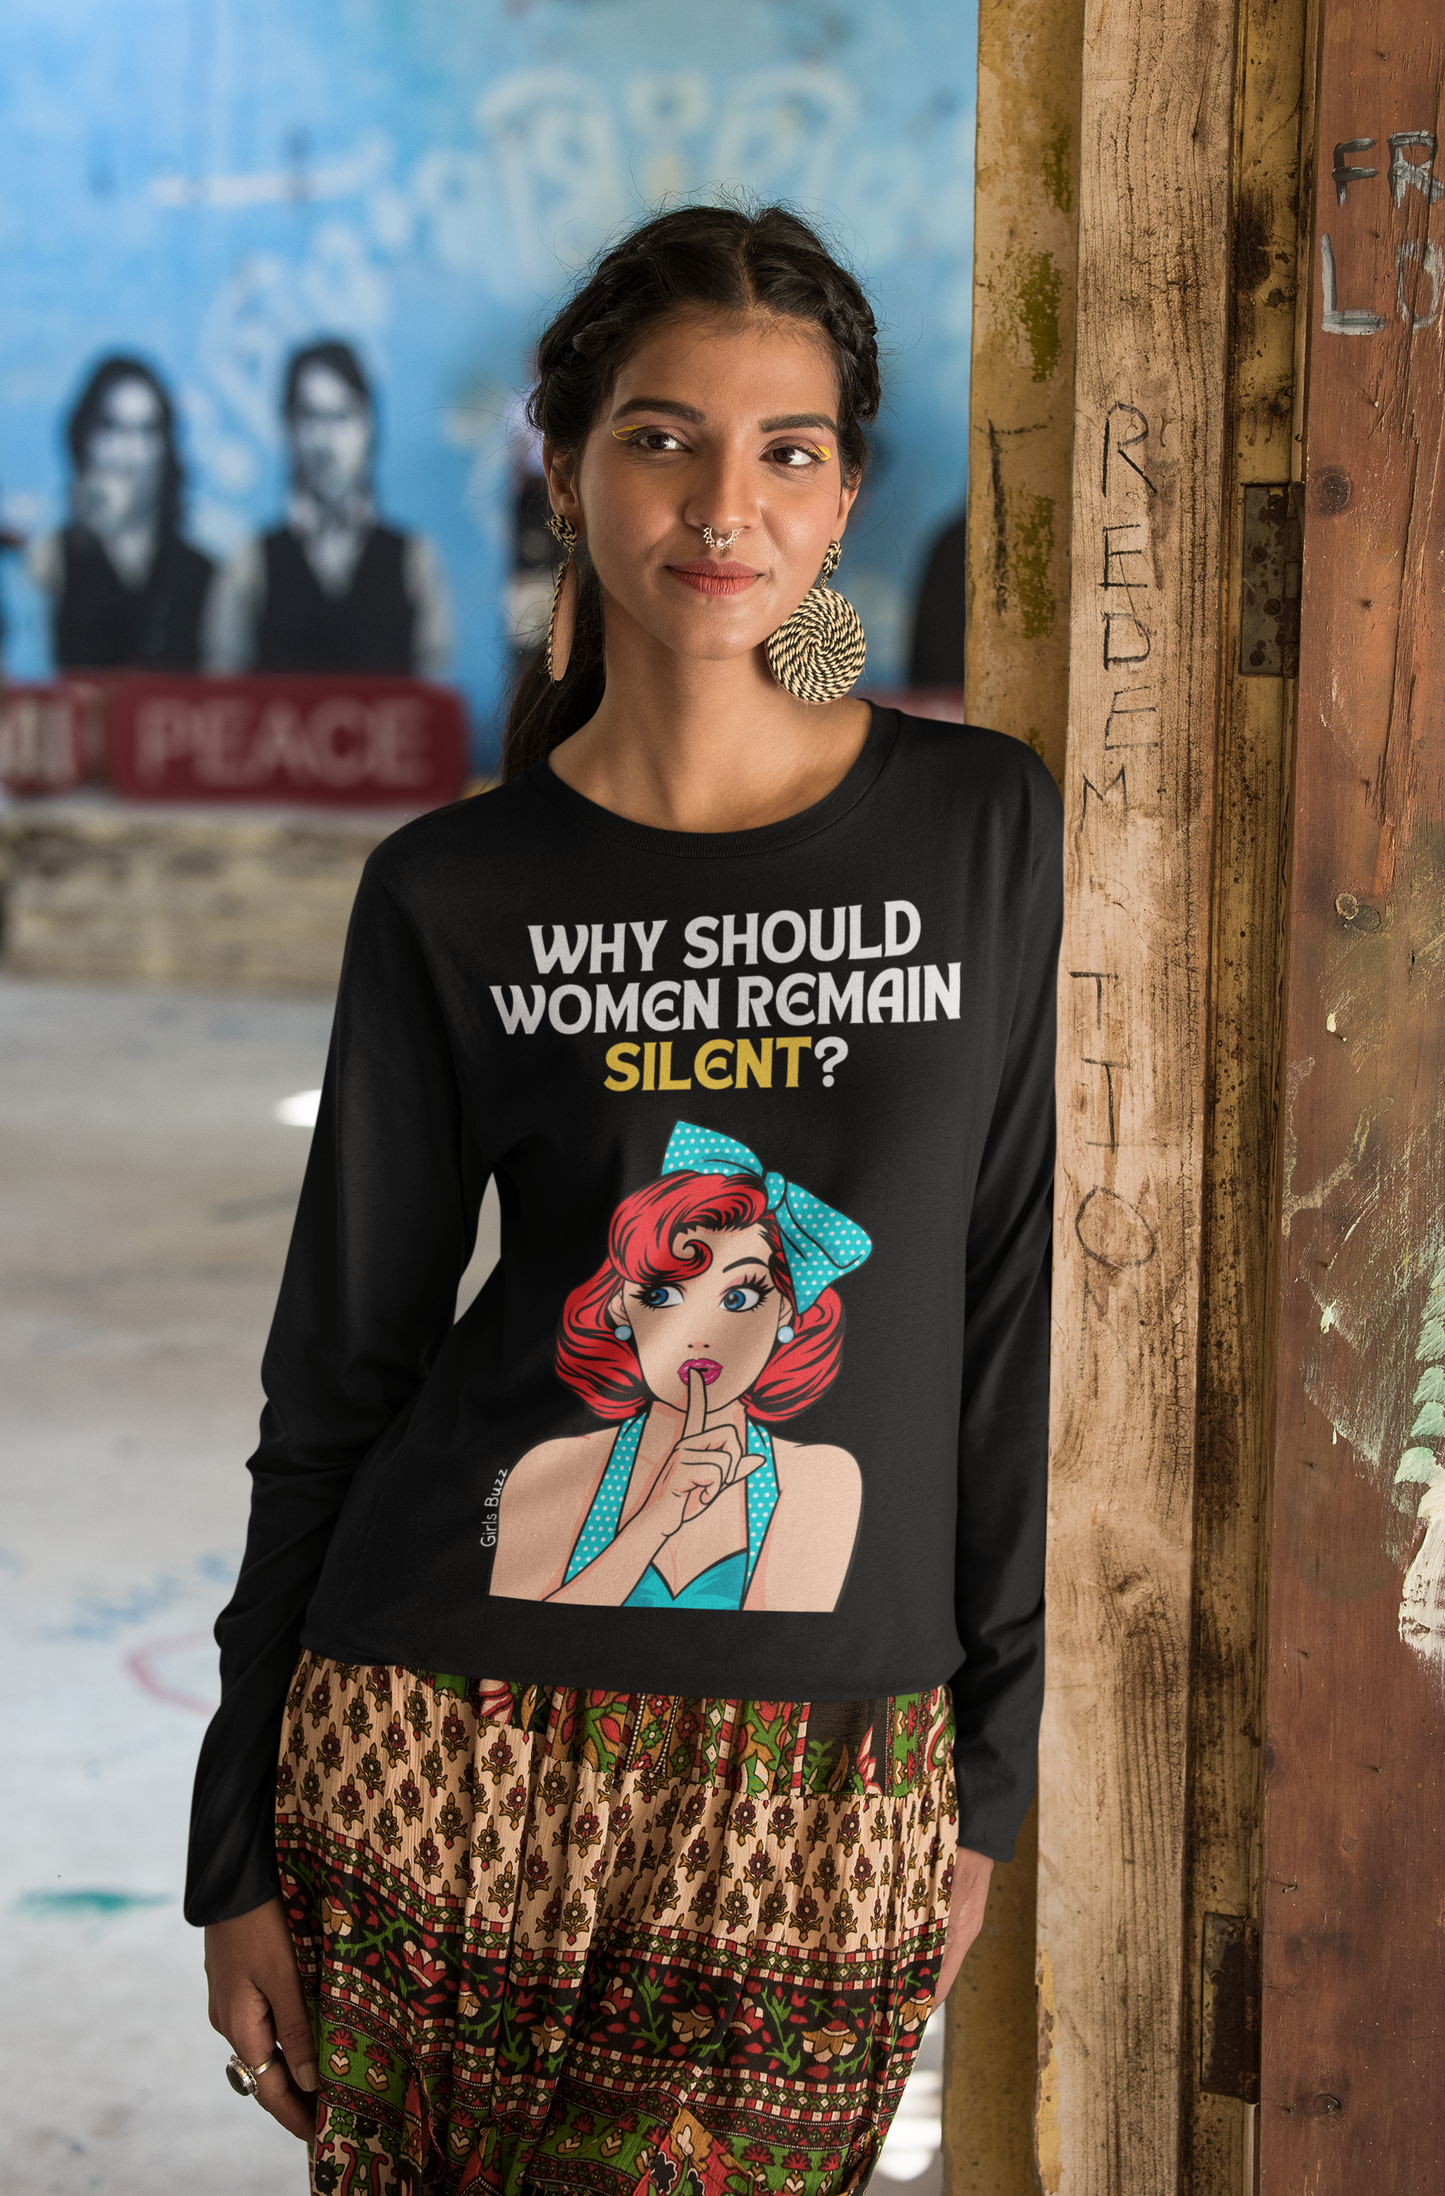 Why Should Women Remain Silent Full Sleeves T-shirt